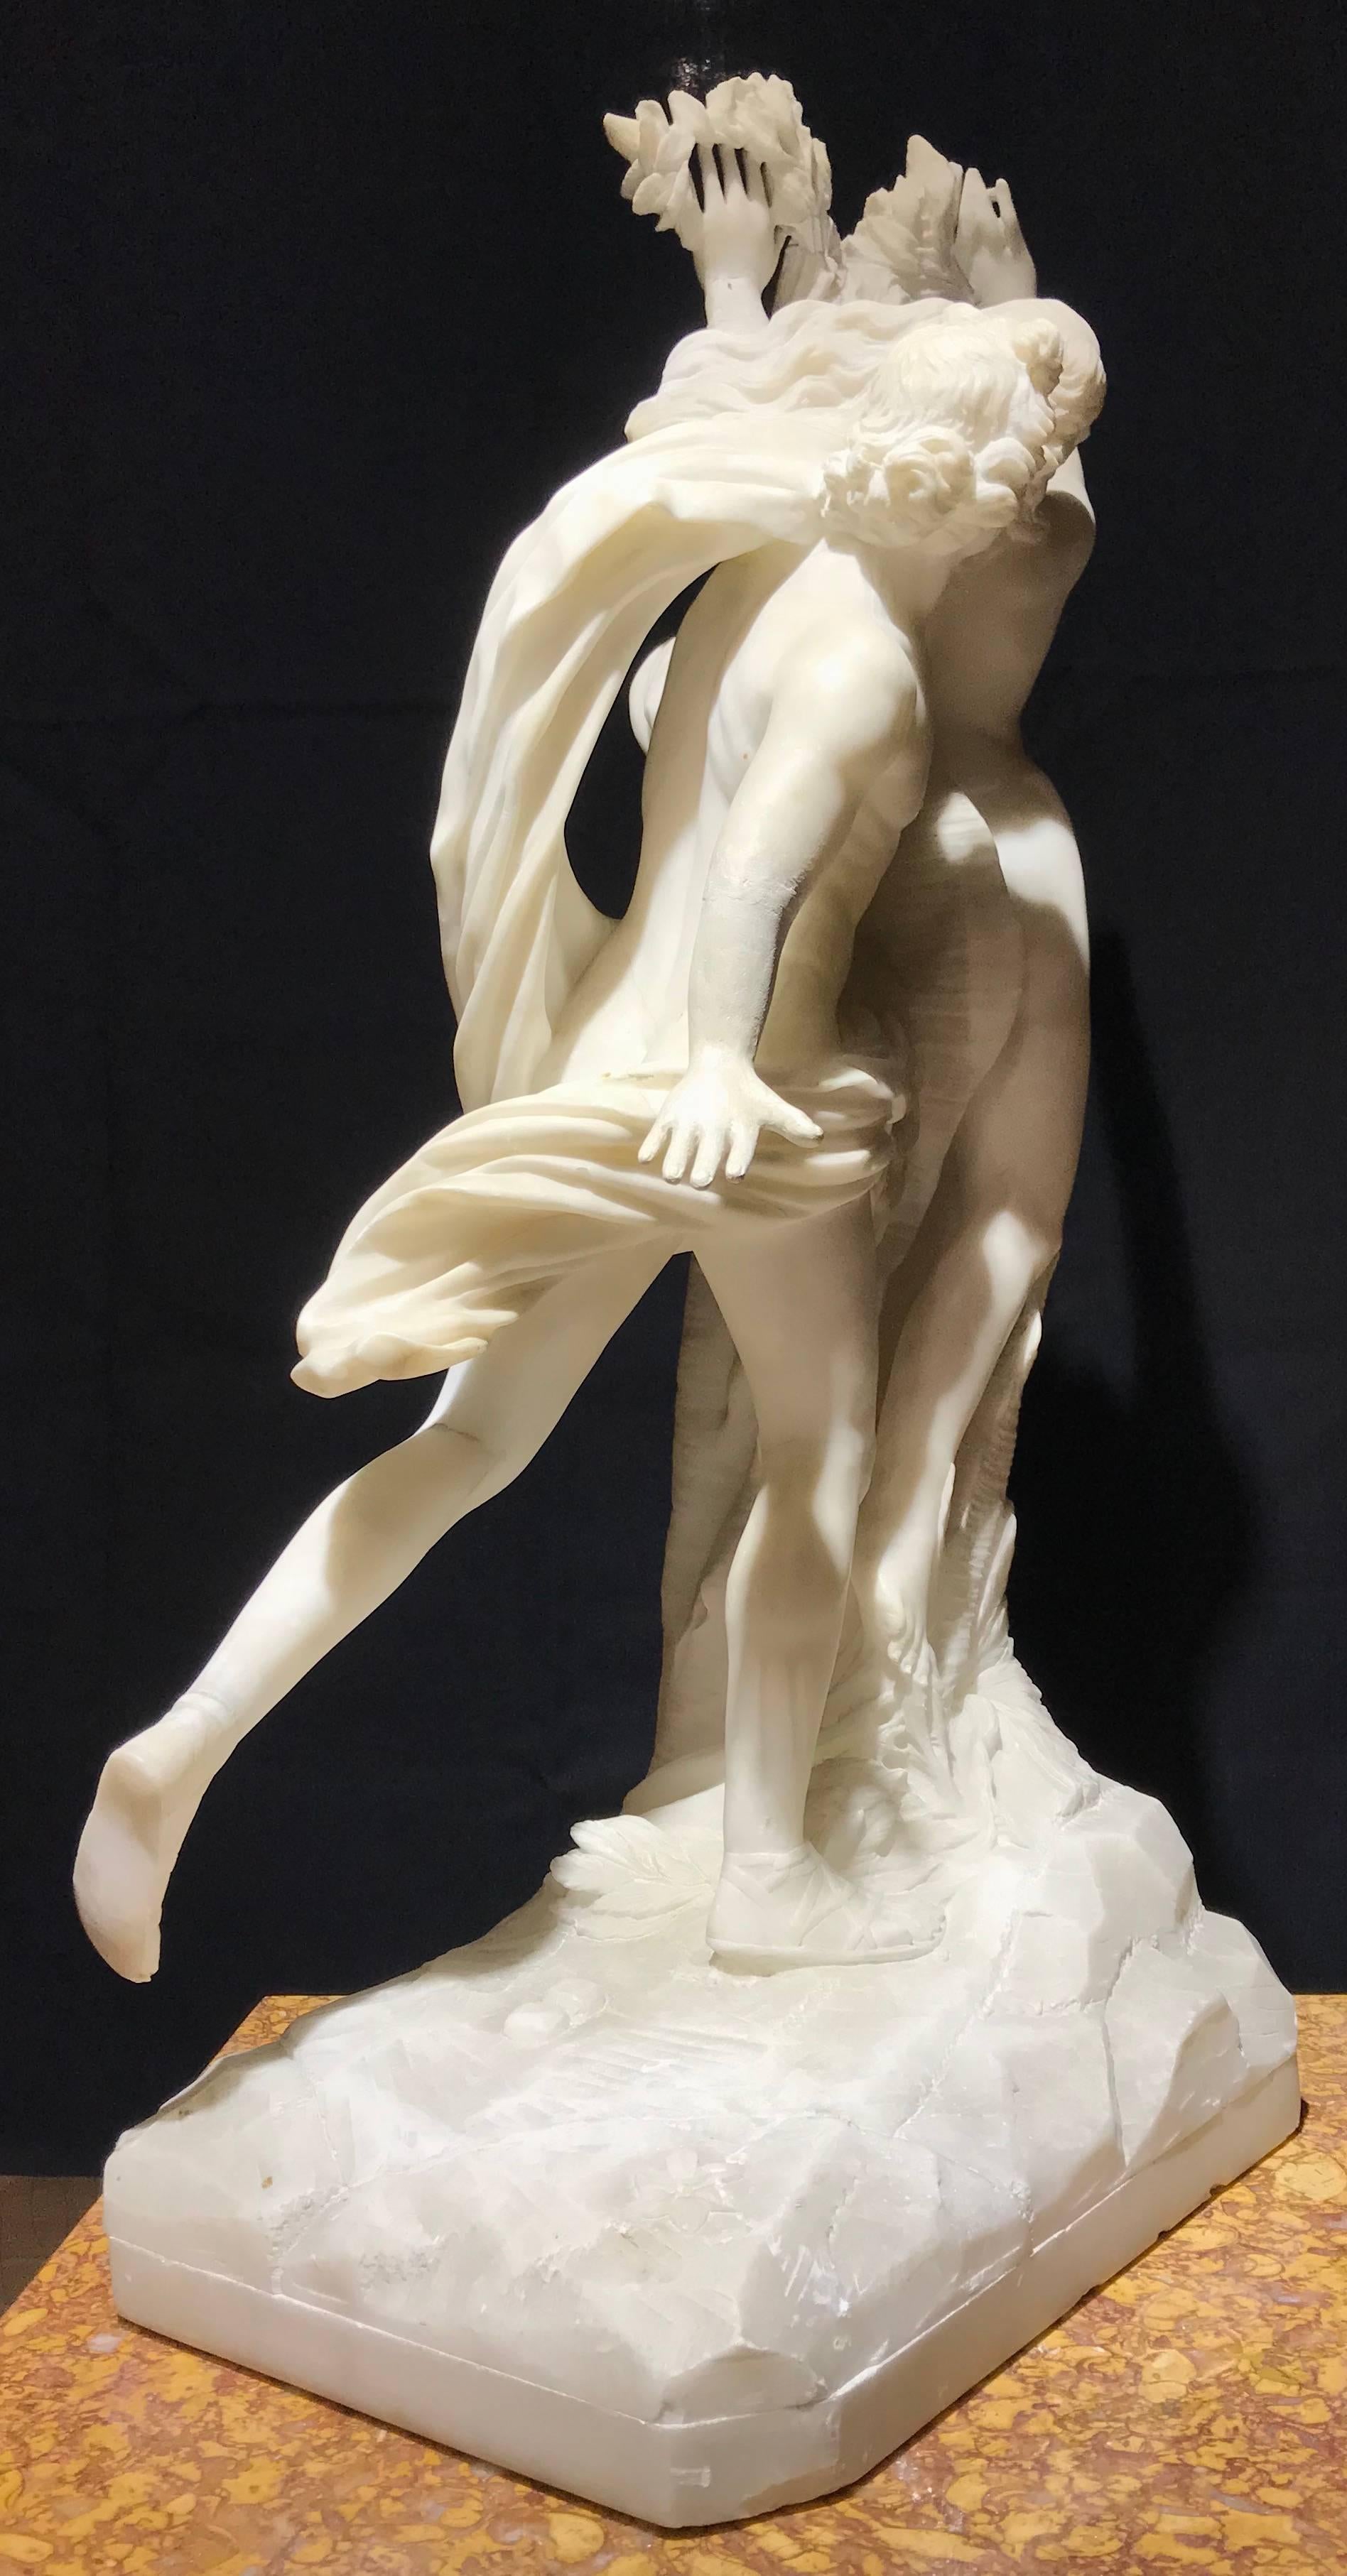 Hand-Carved Sculpture Apollo and Dafne Italian White Alabaster 19th Century after Bernini 